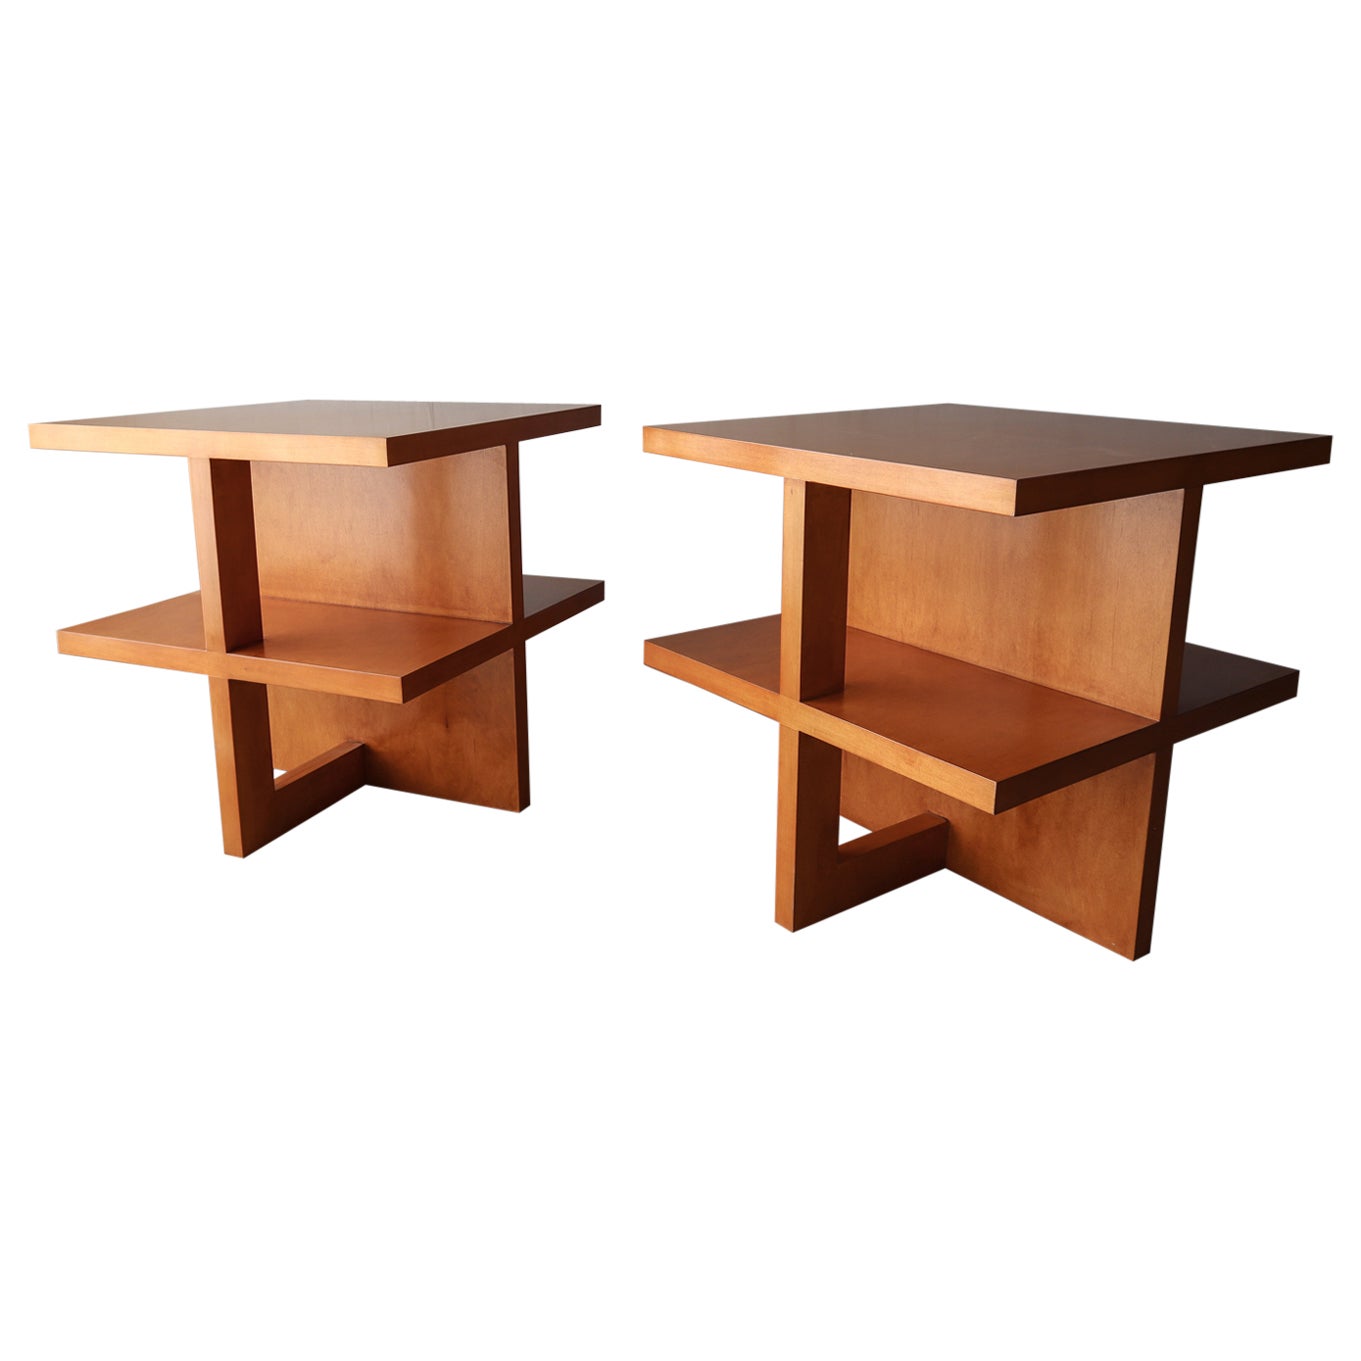 Pair of Large Scale Architectural Cube Side Tables